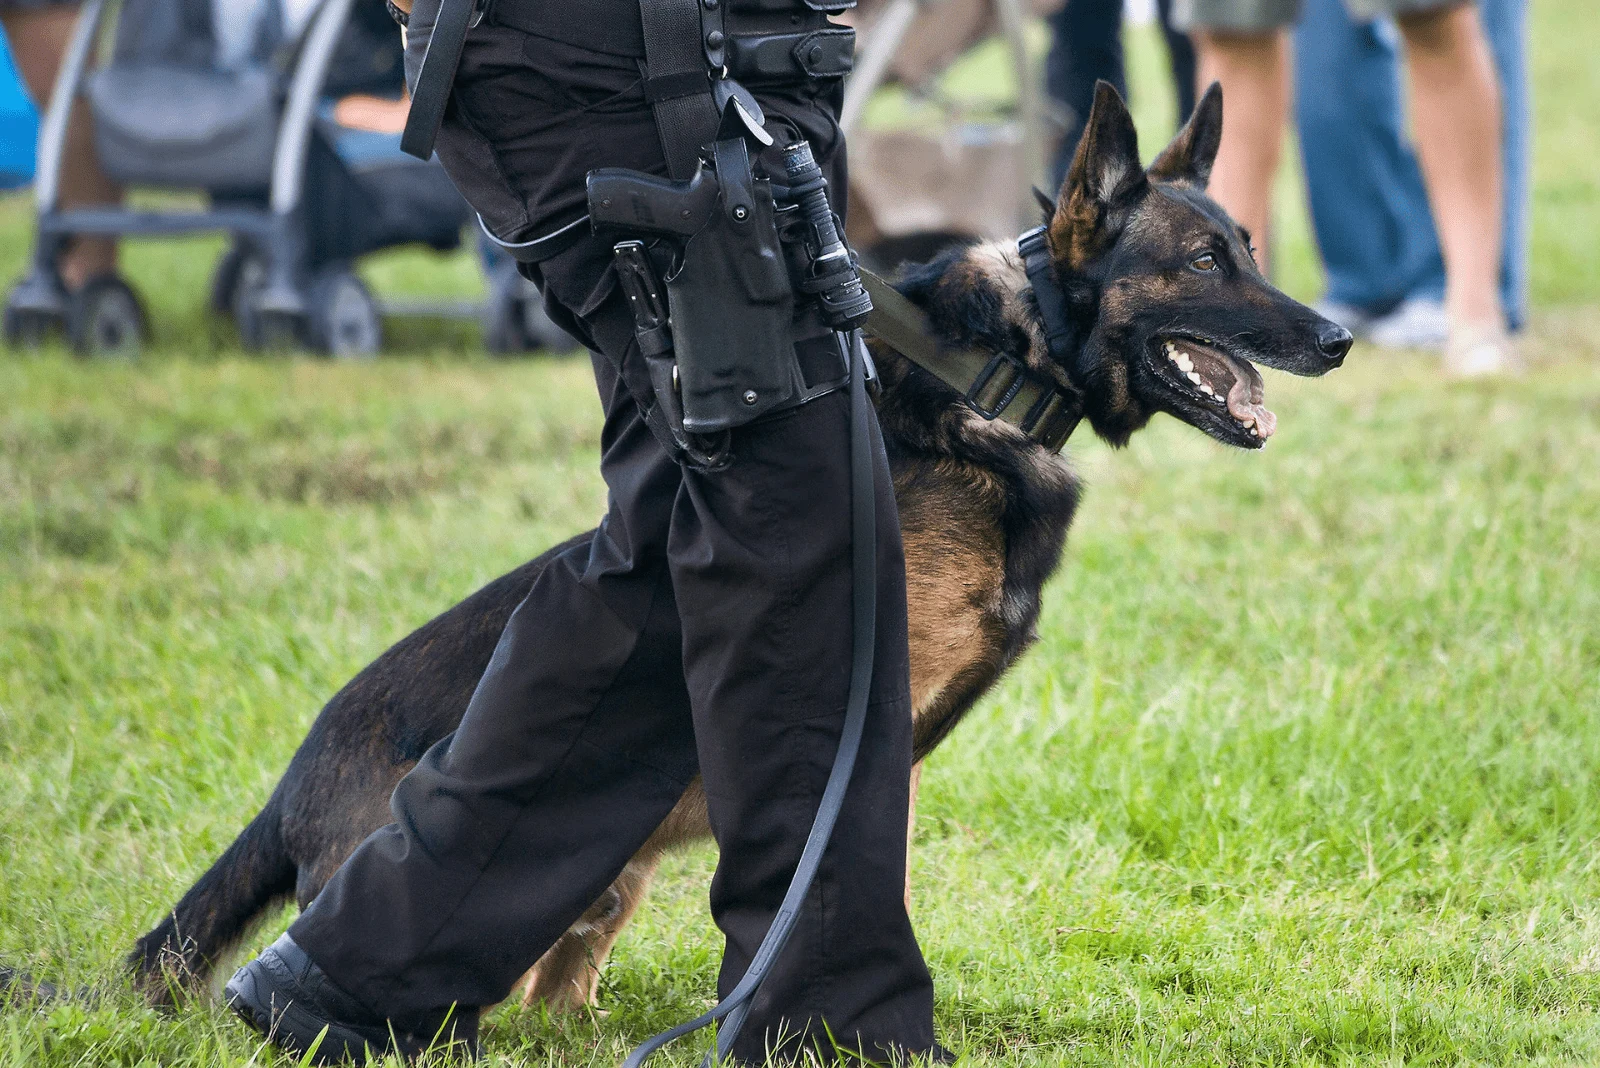 A Belgian Malinois is held by a police officer in training